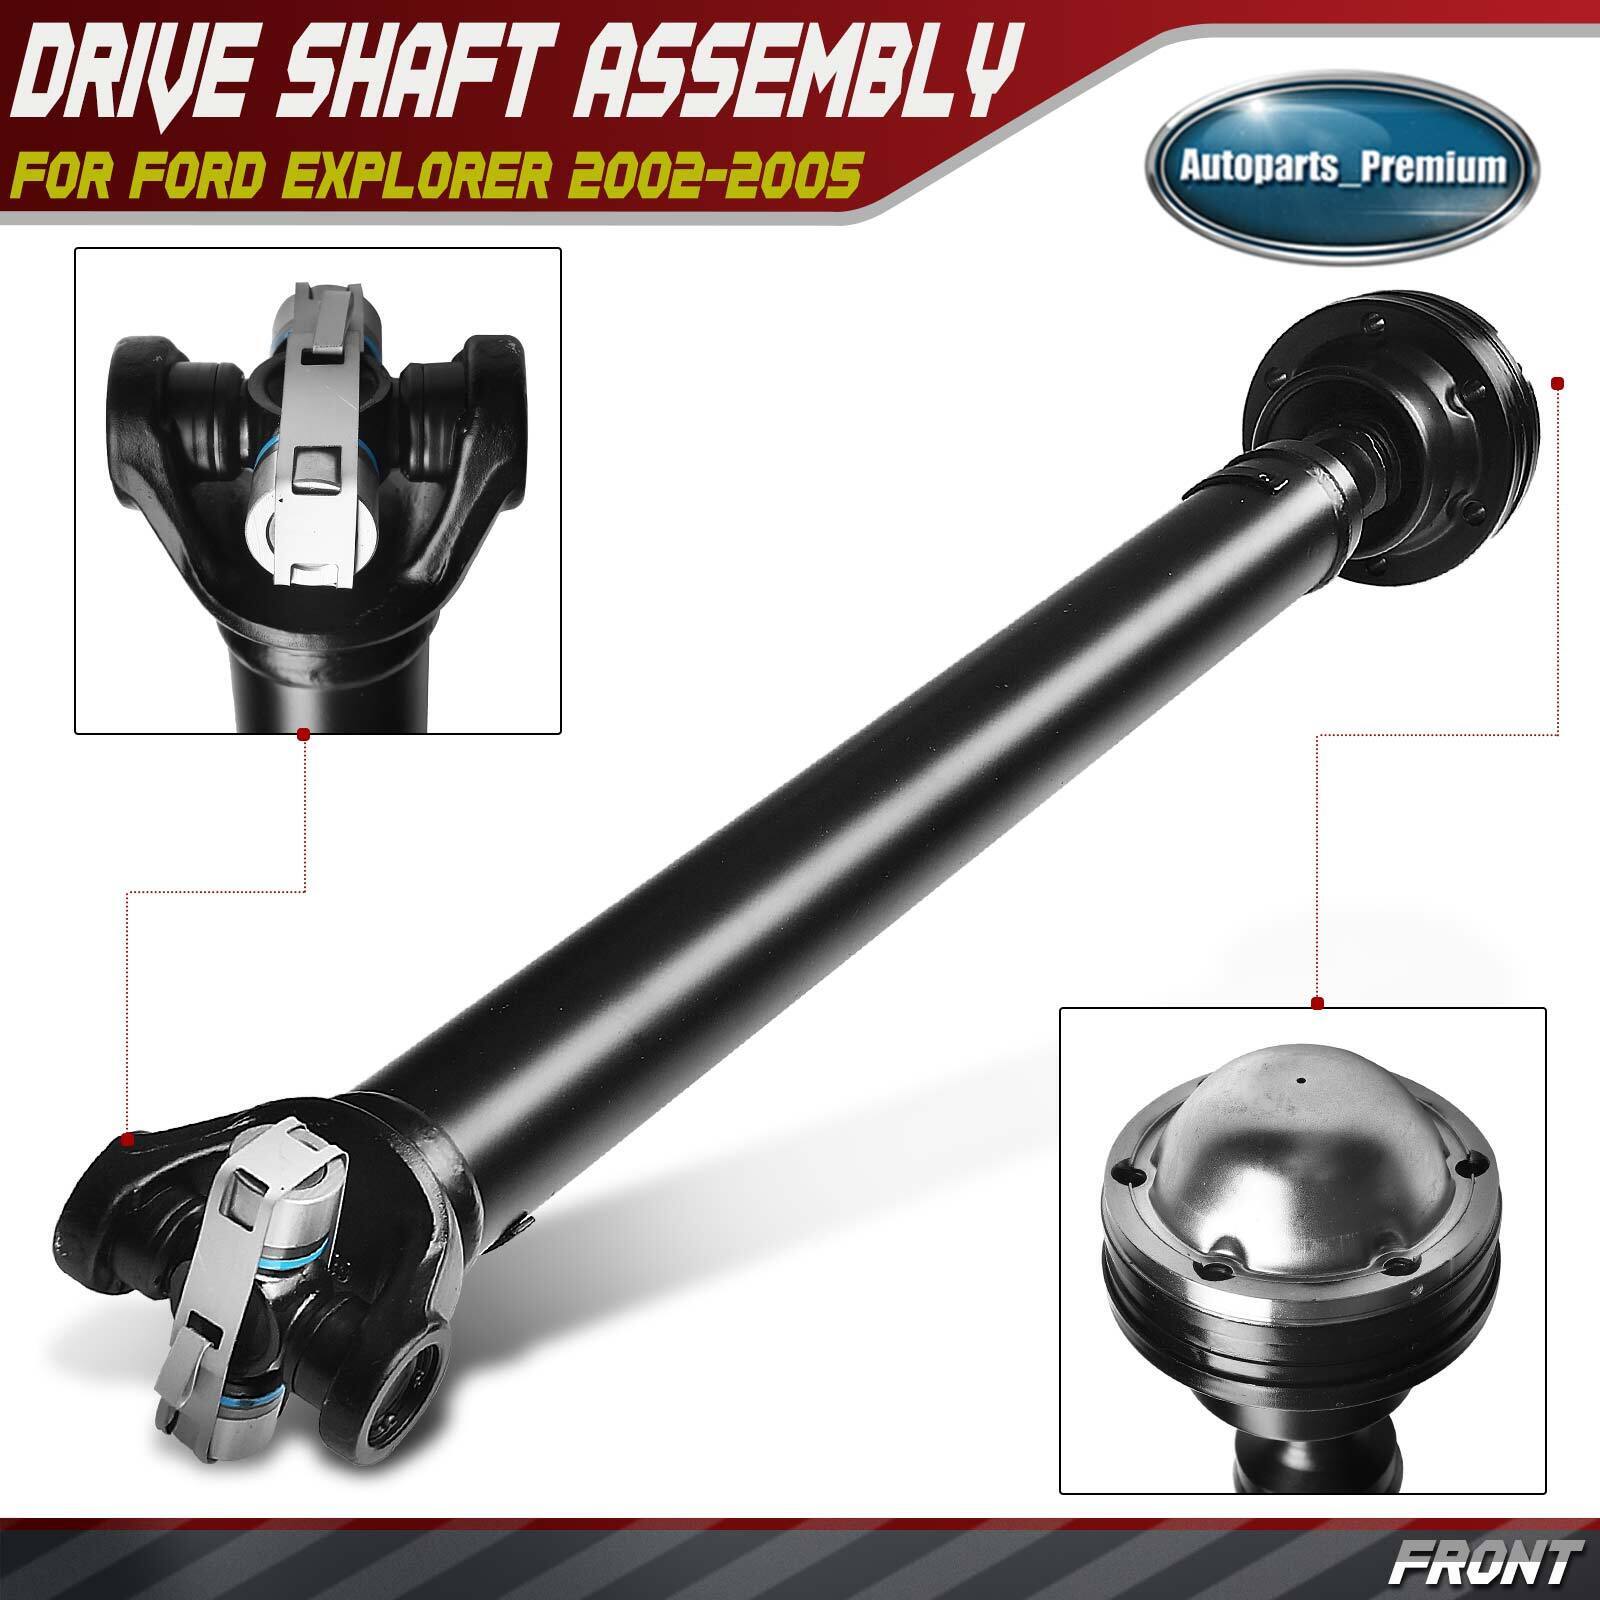 Front Drive Shaft Assembly for Ford Explorer 2002-2005 Lincoln Mercury AWD 4WD